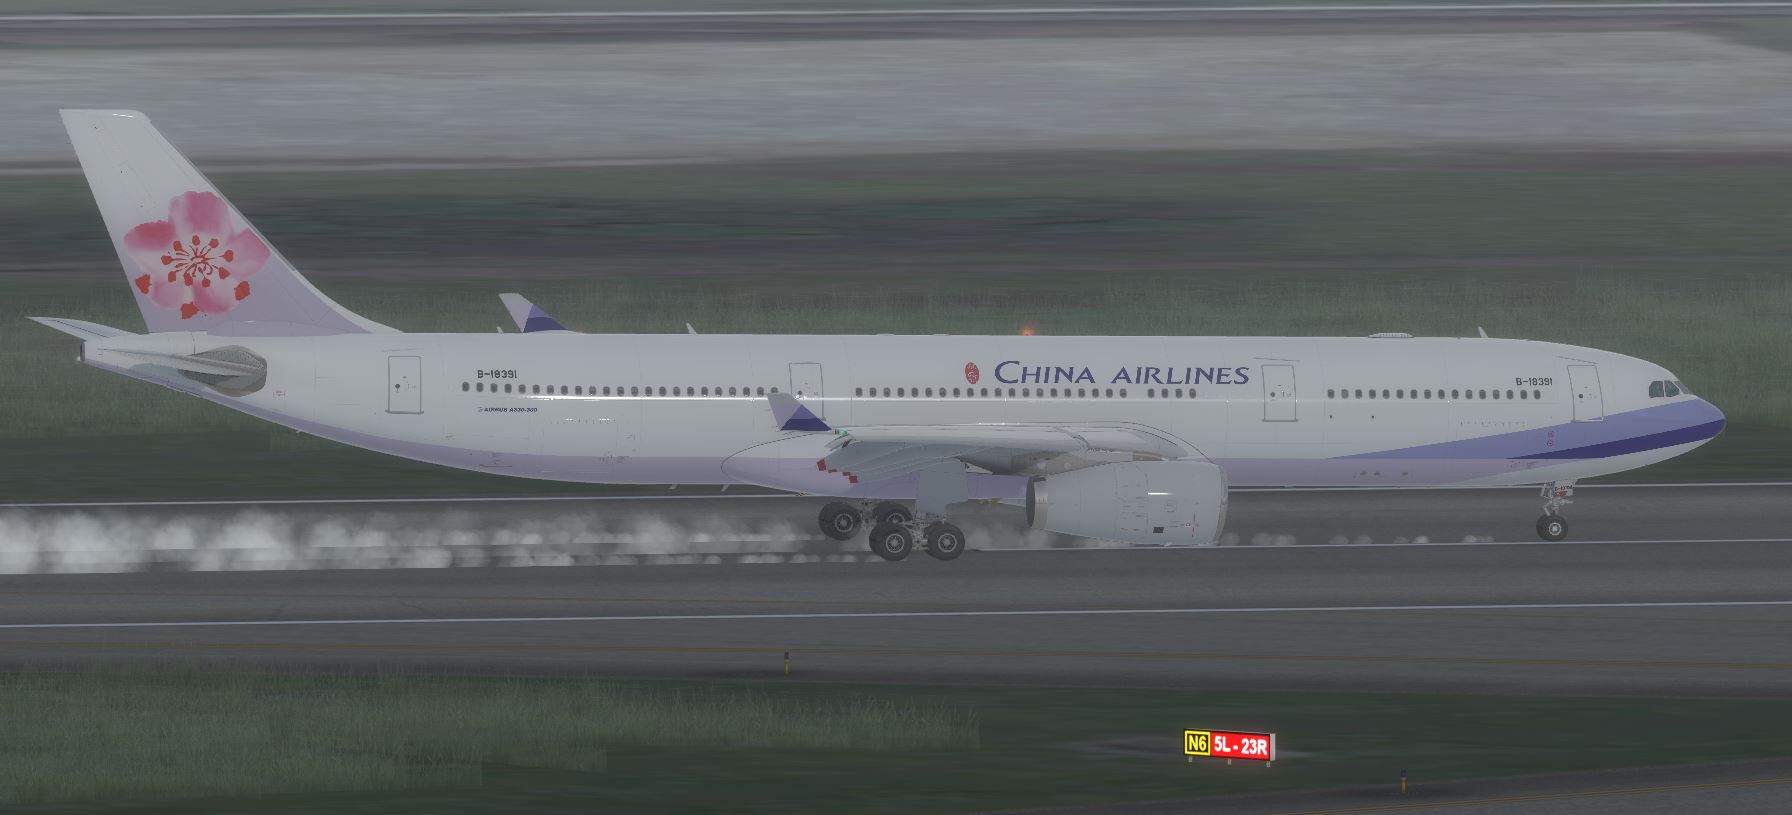 AS A330 ChinaAirline-3350 